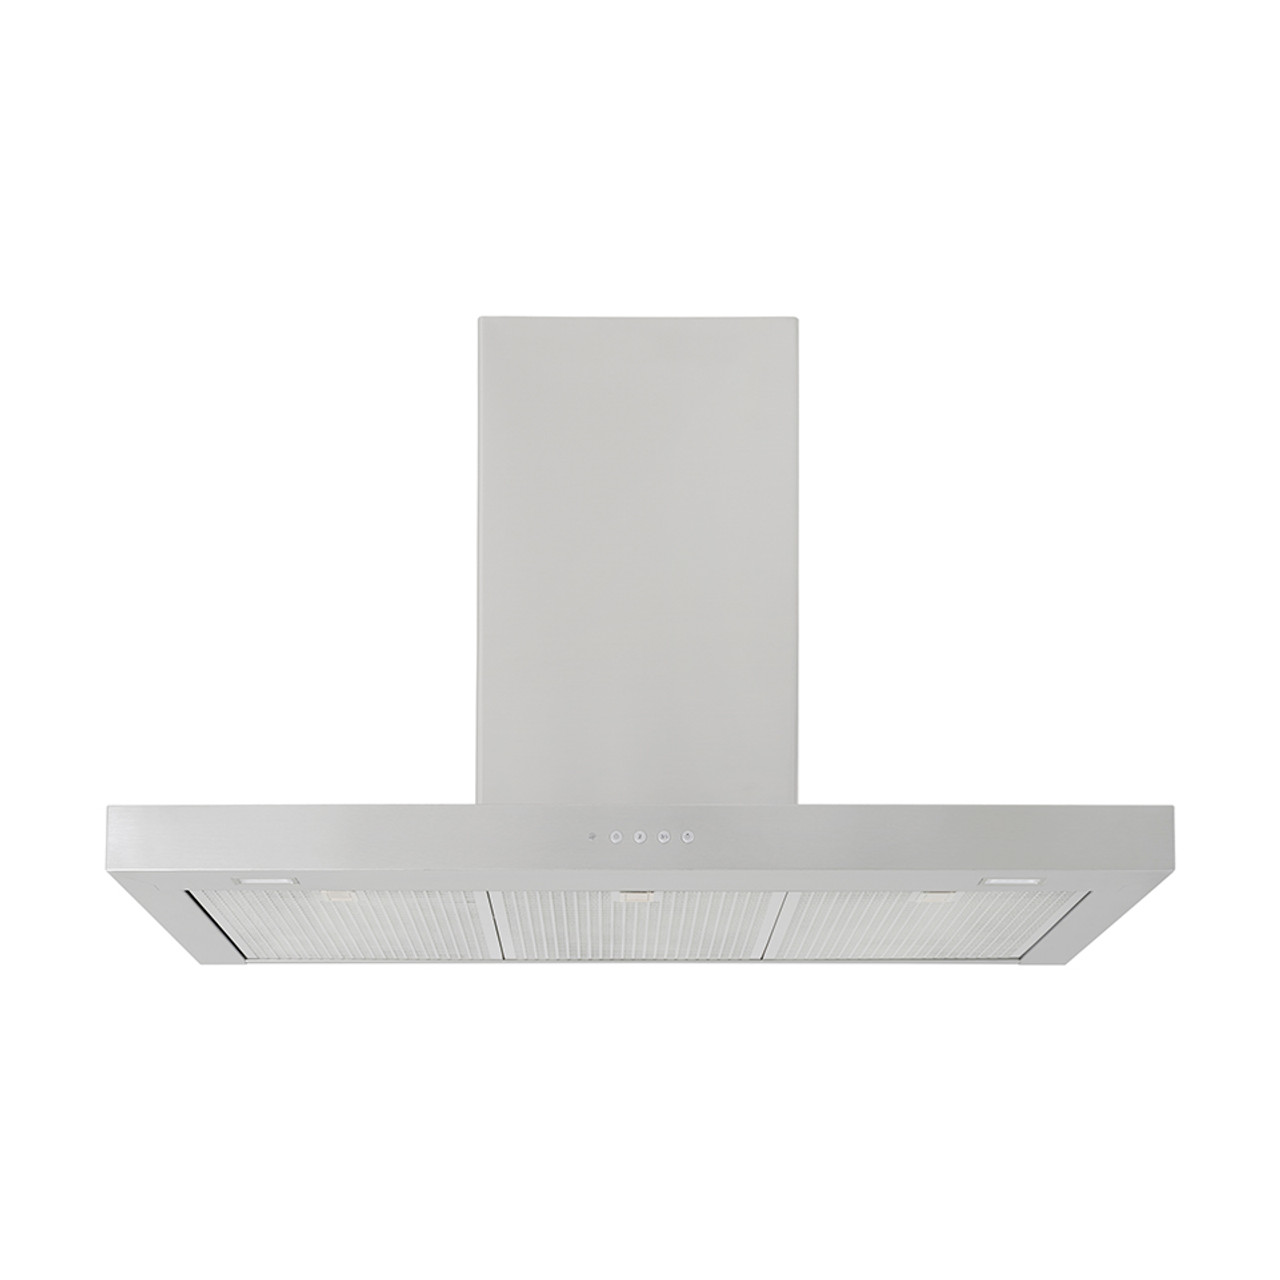 FALHDS90SS -90cm Infusion Canopy Rangehood -Stainless Steel